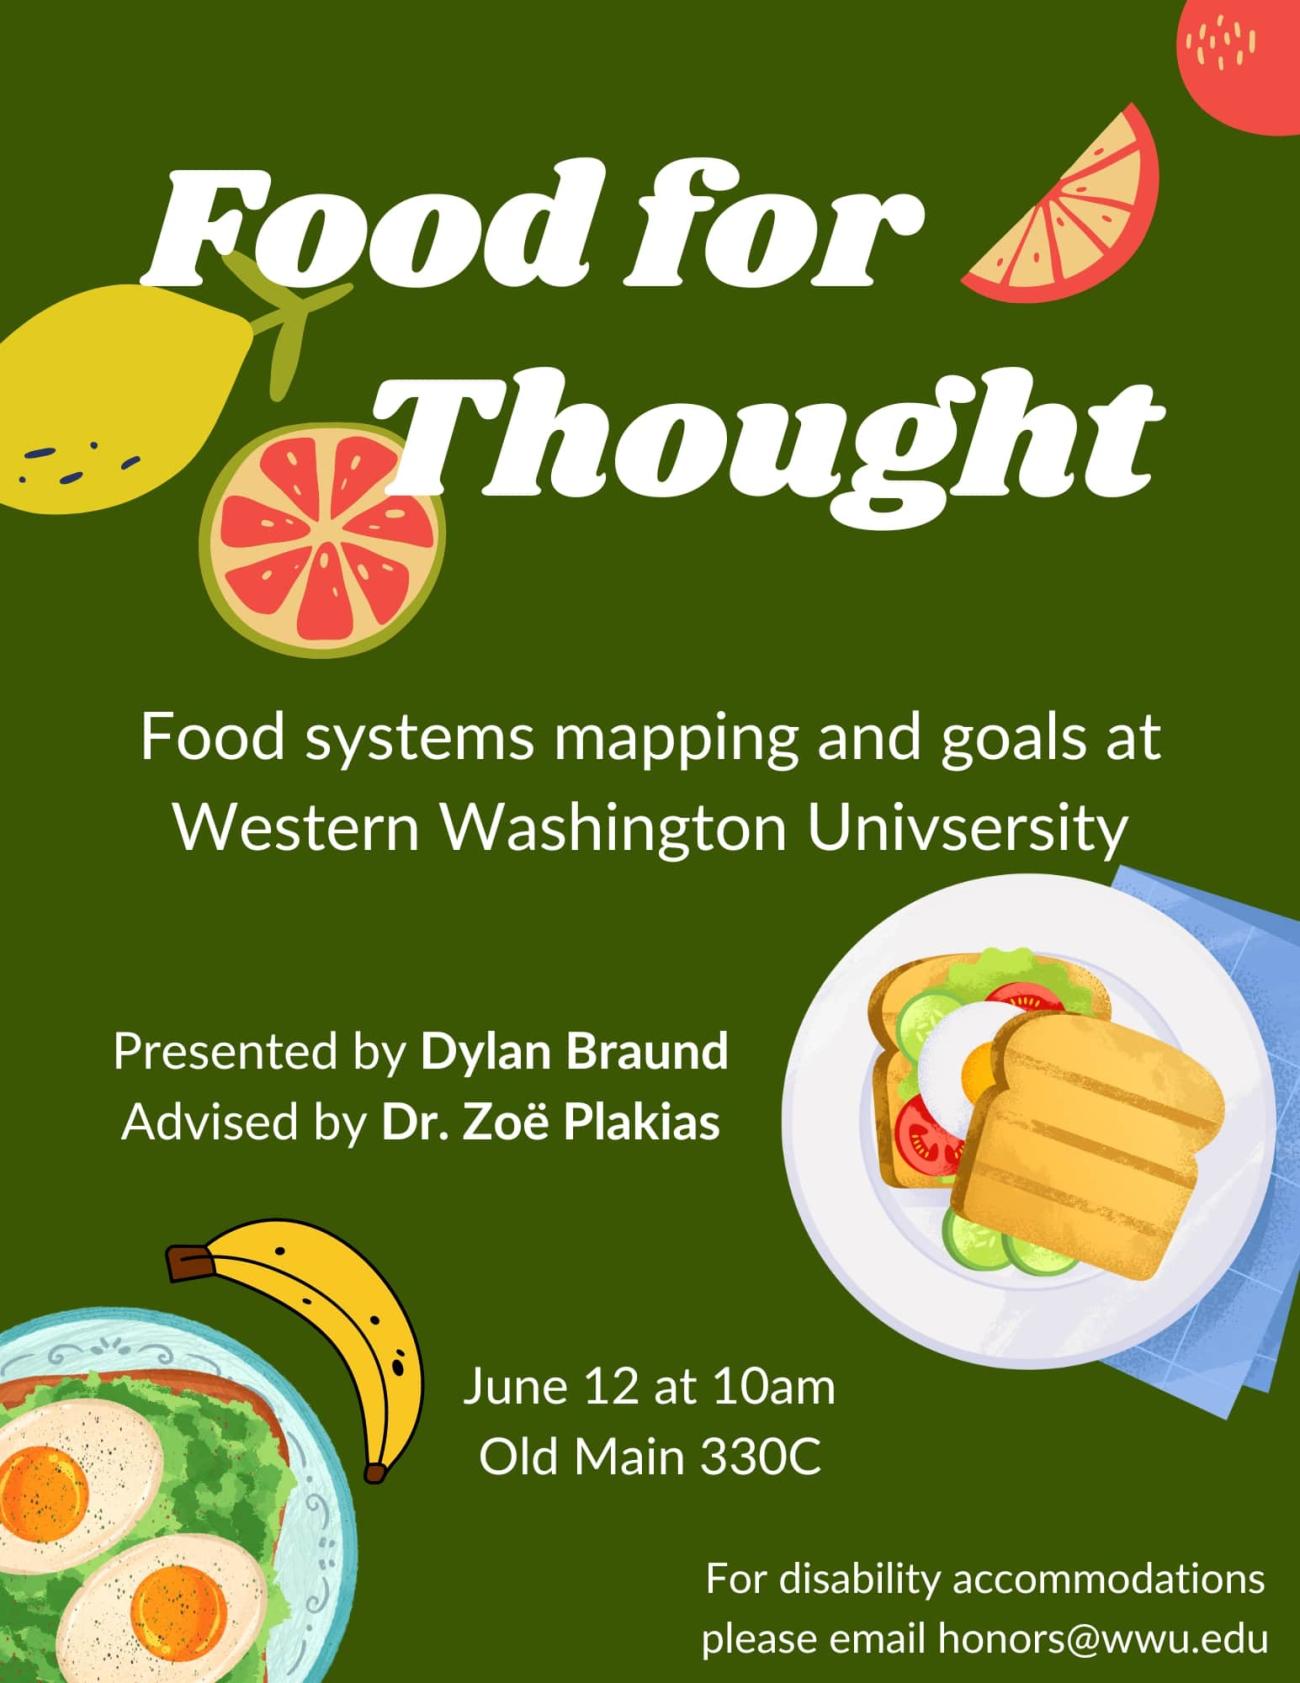 A green poster with pictures of fruit, vegetables, eggs, and bread. The text reads: "Food for Thought: Food systems mapping and goals at Western Washington University. Presented by Dylan Braund, advised by Dr. Zoë Plakias. June 12 at 10am. Old Main 330C. For disability accommodations please email honors@wwu.edu."